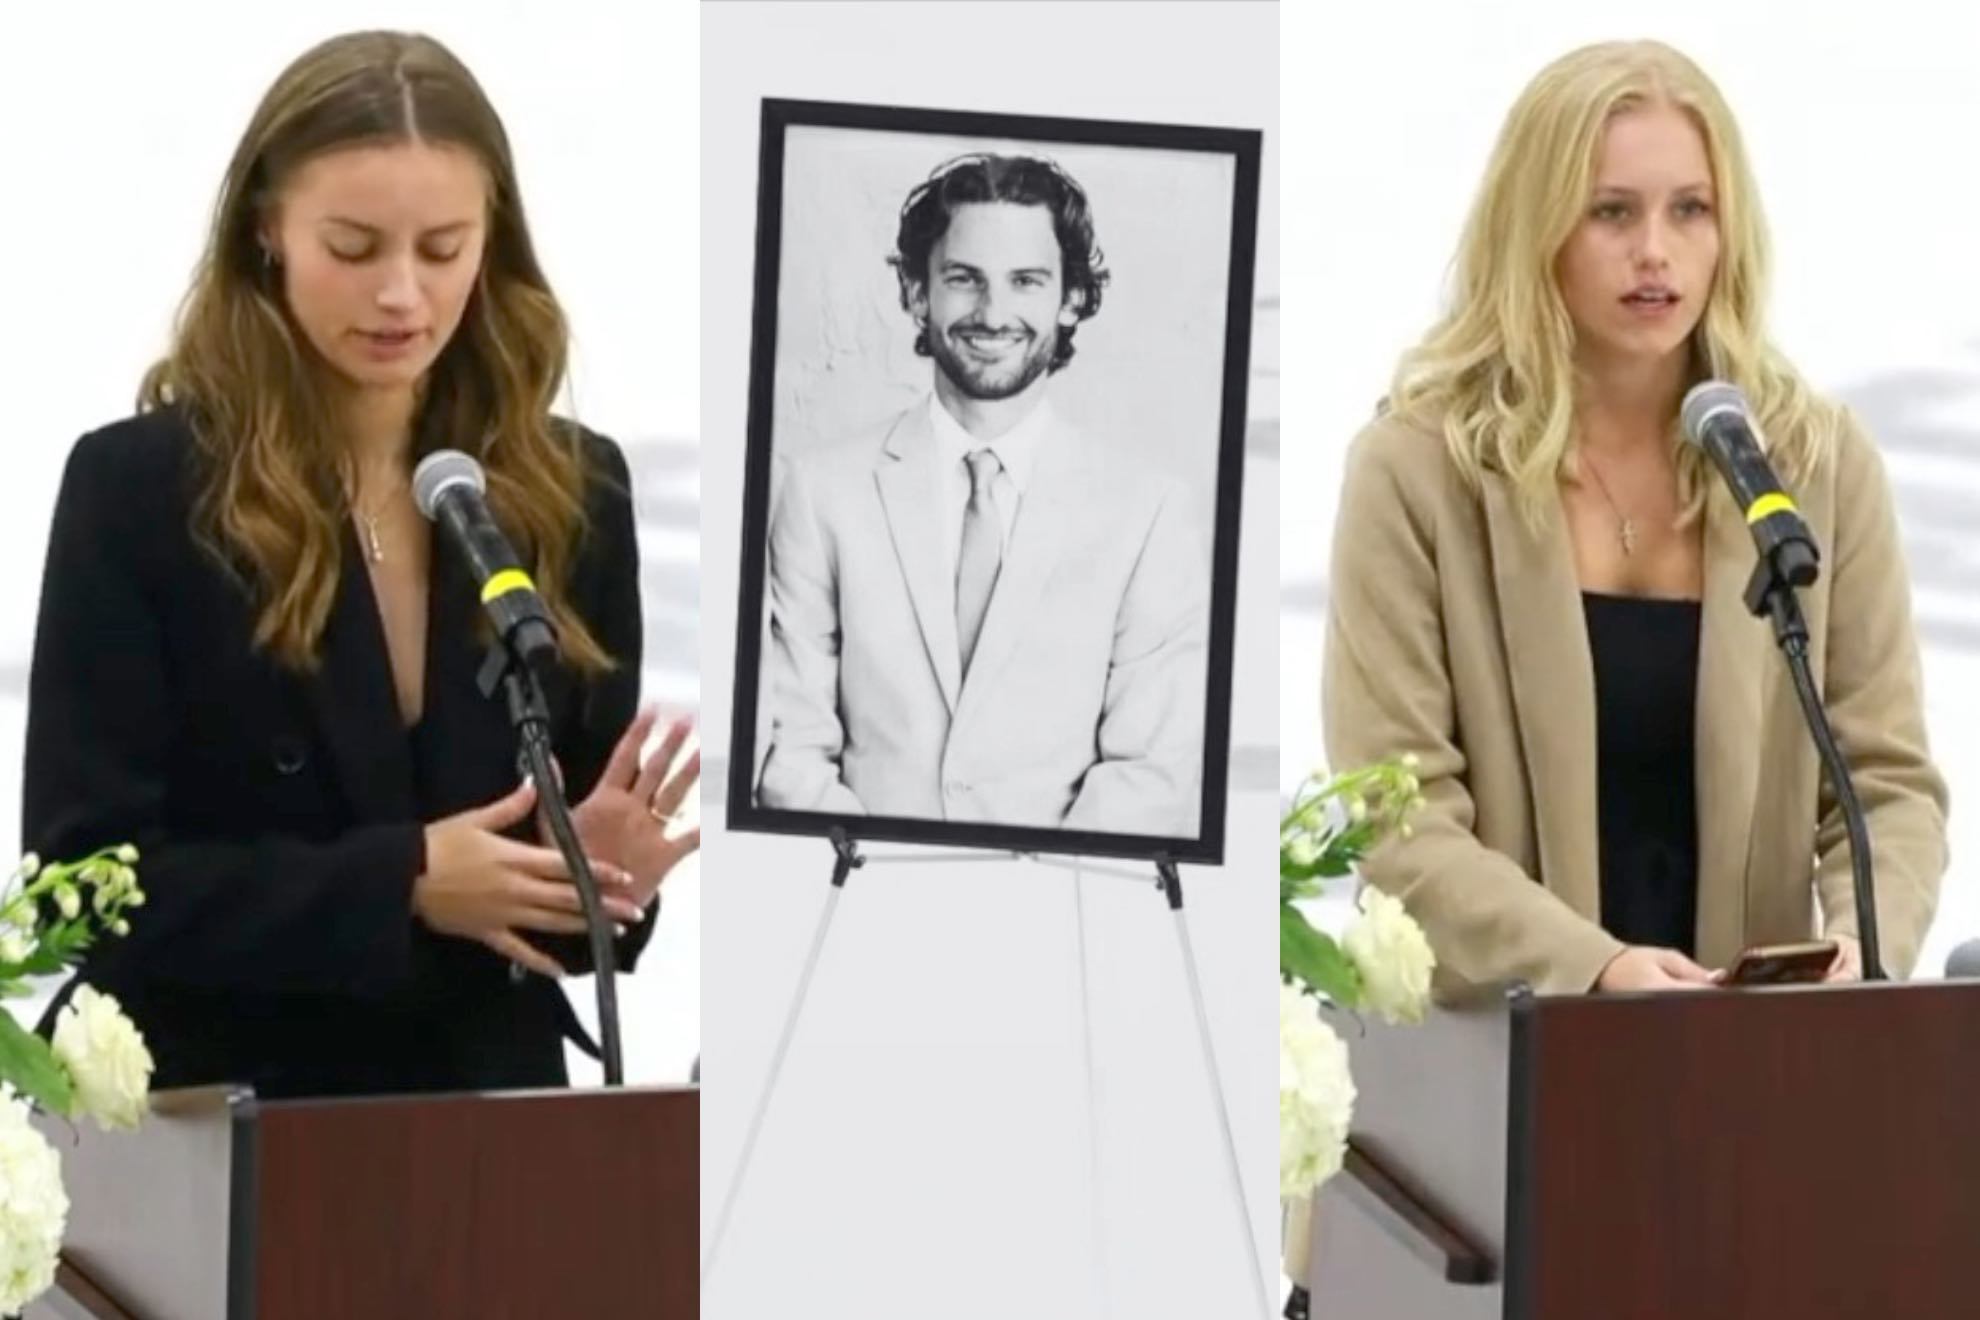 Adam Johnson's friends and family honor the ex-NHL player as a  "hometown hero" in emotional memorial service